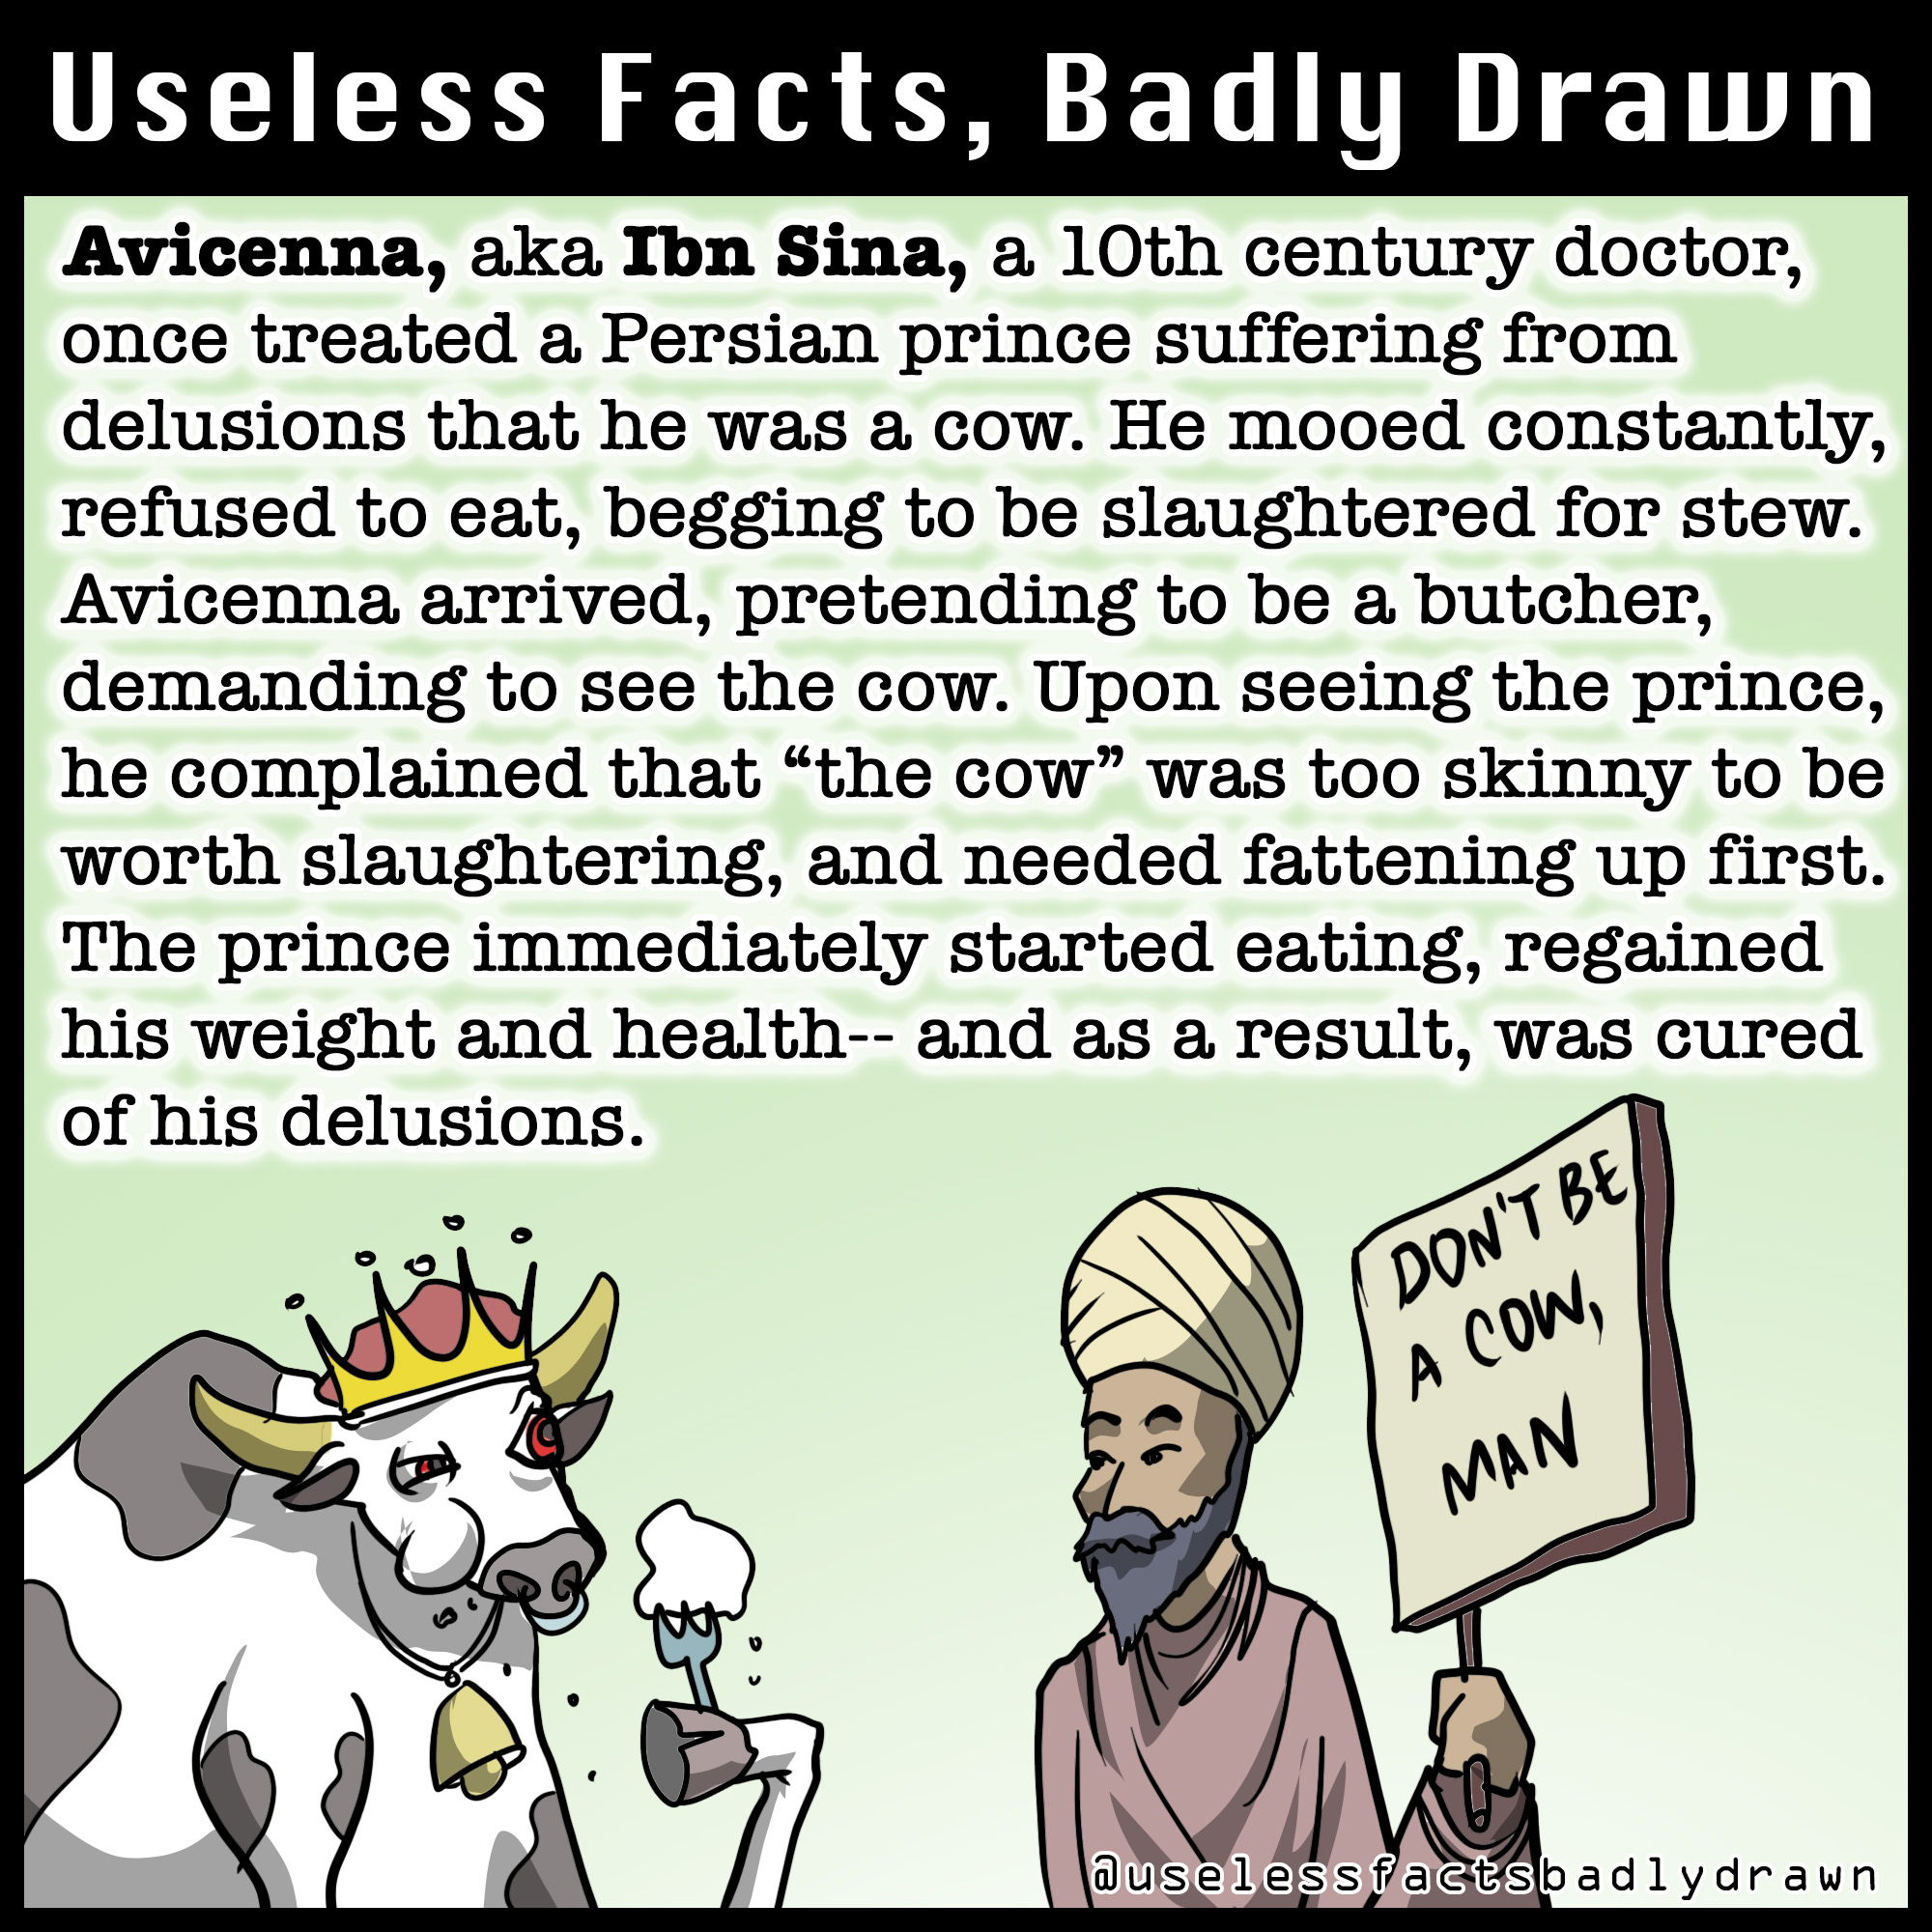 quotes - Useless Facts, Badly Drawn Avicenna, aka Ibn Sina, a 10th century doctor, once treated a Persian prince suffering from delusions that he was a cow. He mooed constantly, refused to eat, begging to be slaughtered for stew. Avicenna arrived, pretend